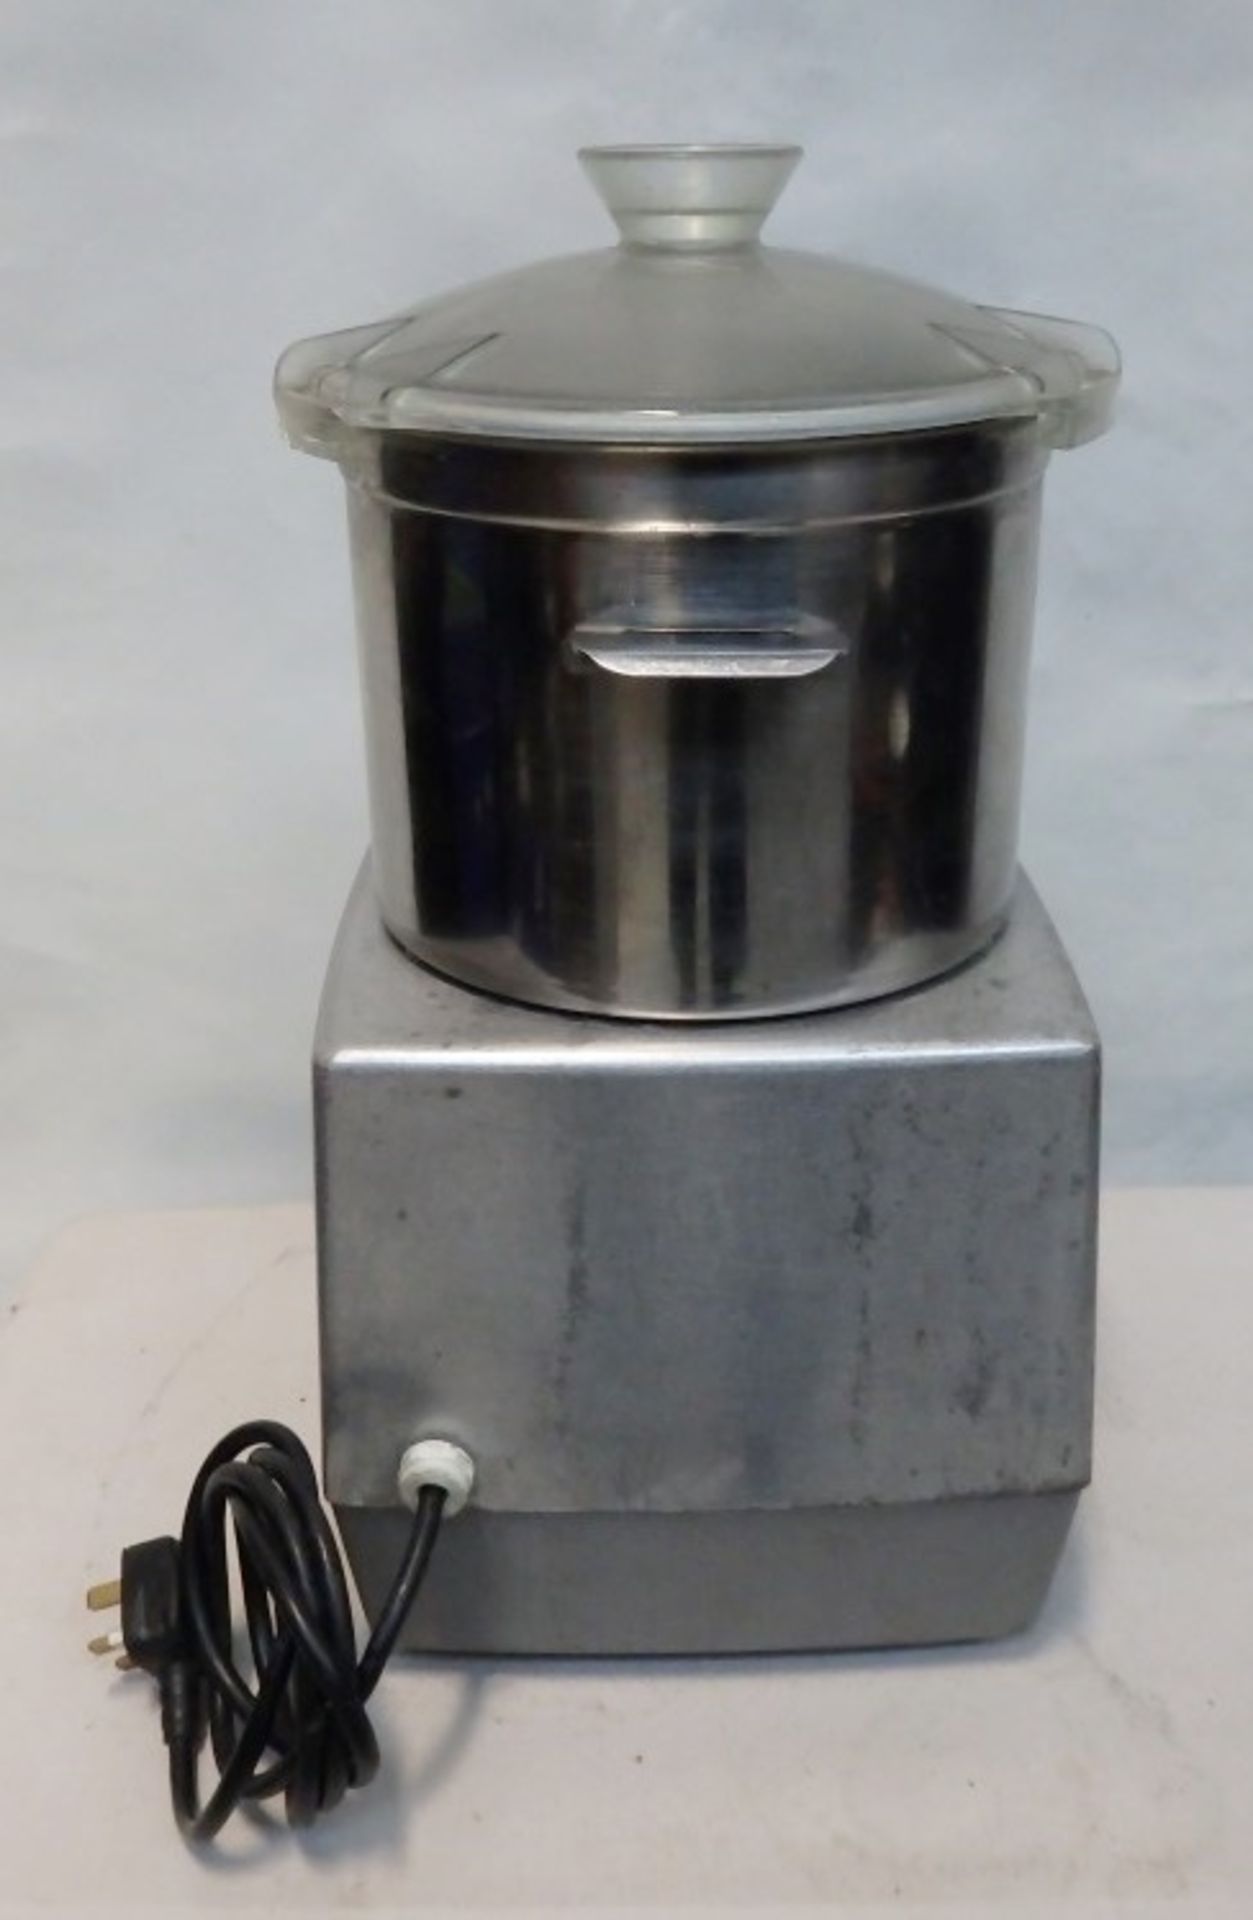 1 x "Robot Coupe" Table-Top Cutter / Mixer - Model: R6 V.V. - 1500 Watts,  Single-phase - Bowl - Image 5 of 6